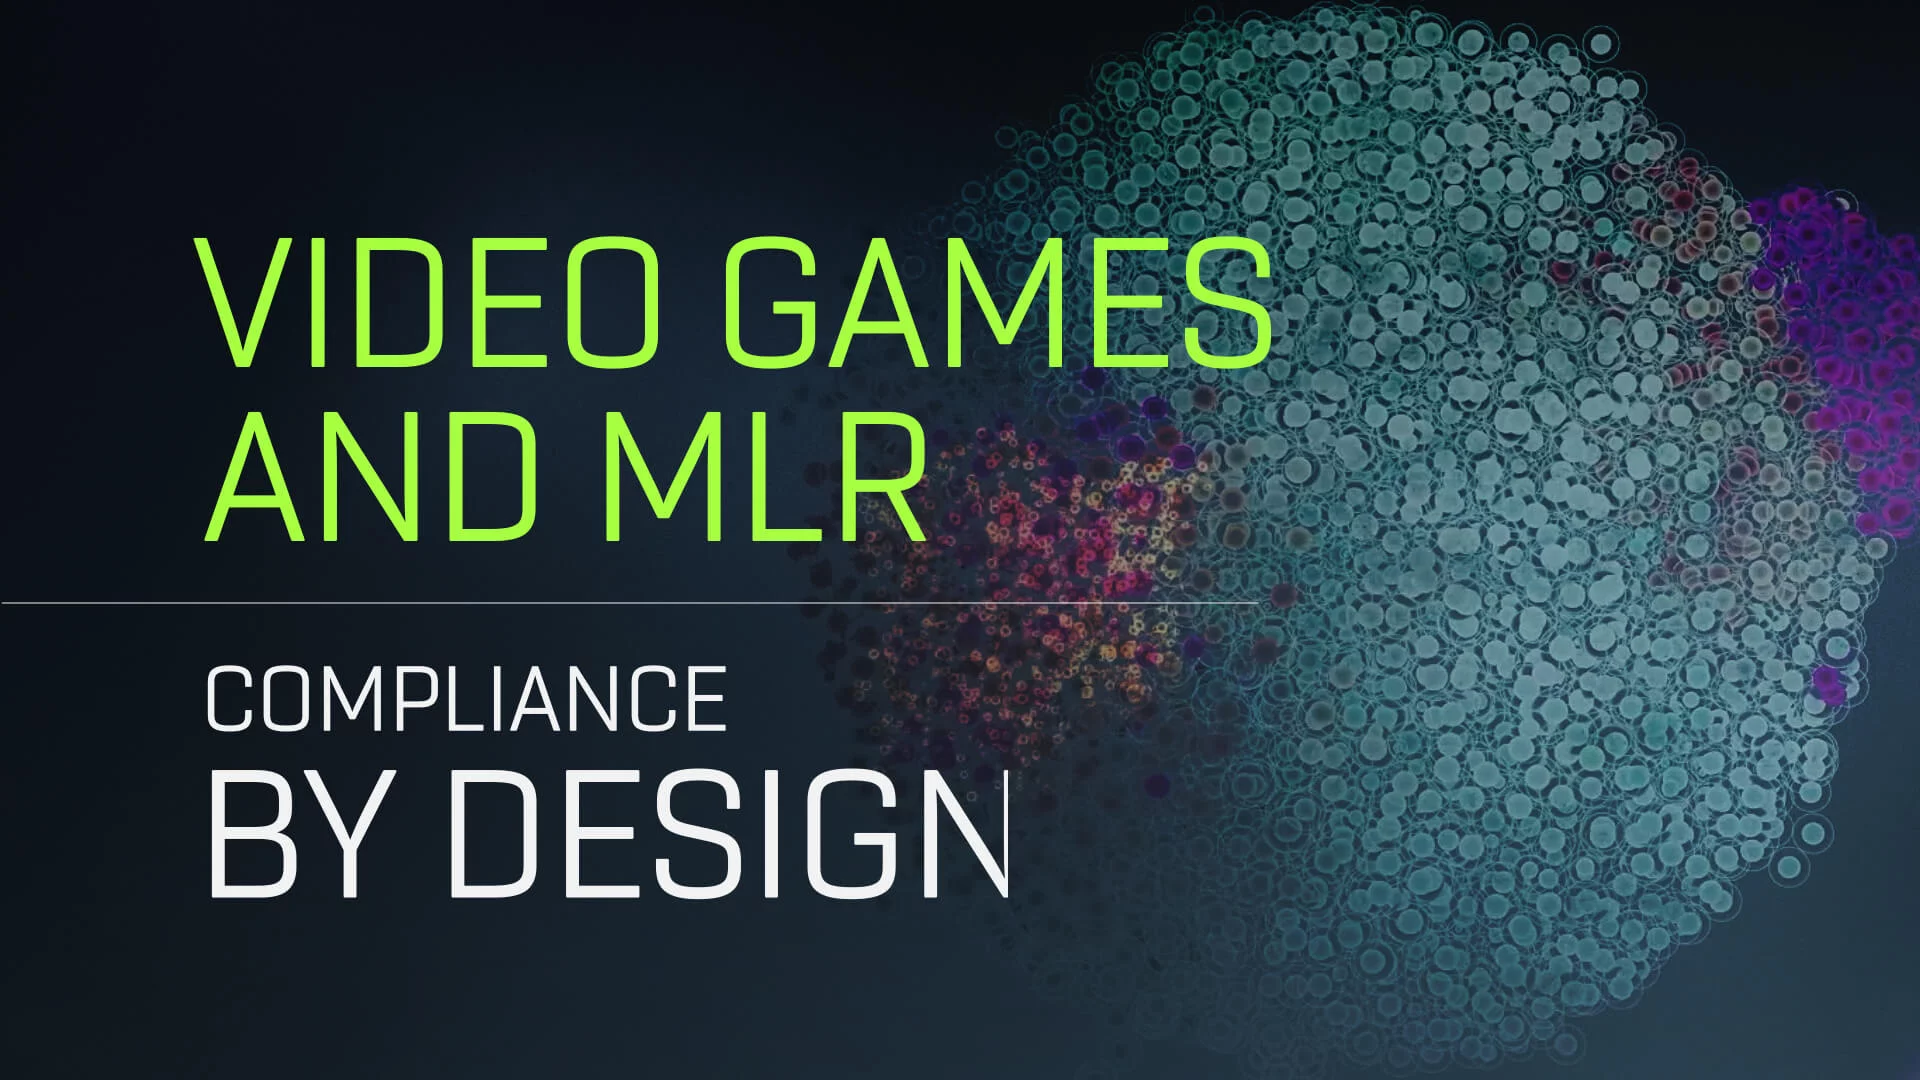 Part 2: Video Games And MLR: Compliance By Design